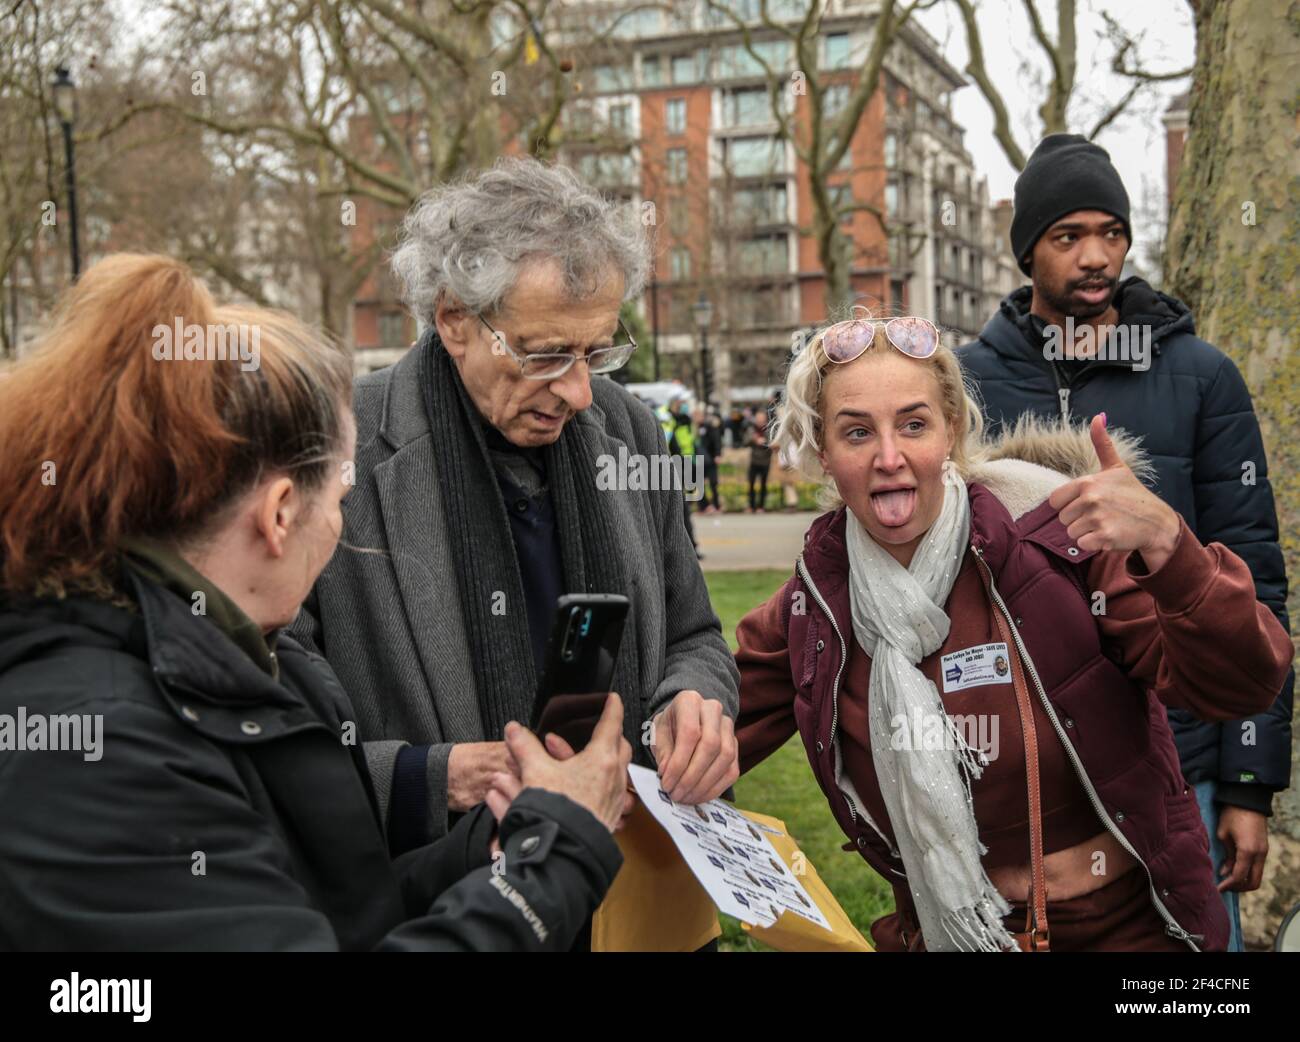 London UK 20 March 2021. Piers Corbyn English weather forecaster, businessman, activist, anti-vaxxer and conspiracy theorist arrives in Hyde Park to take part in todays anti lockdown ,anti vaccine and anti new laws to curb demonstrations ,currently been debated in parliament , giving a fan a sticker with his name and face campaigning for London Mayor . Paul Quezada-Neiman/Alamy Live News Stock Photo